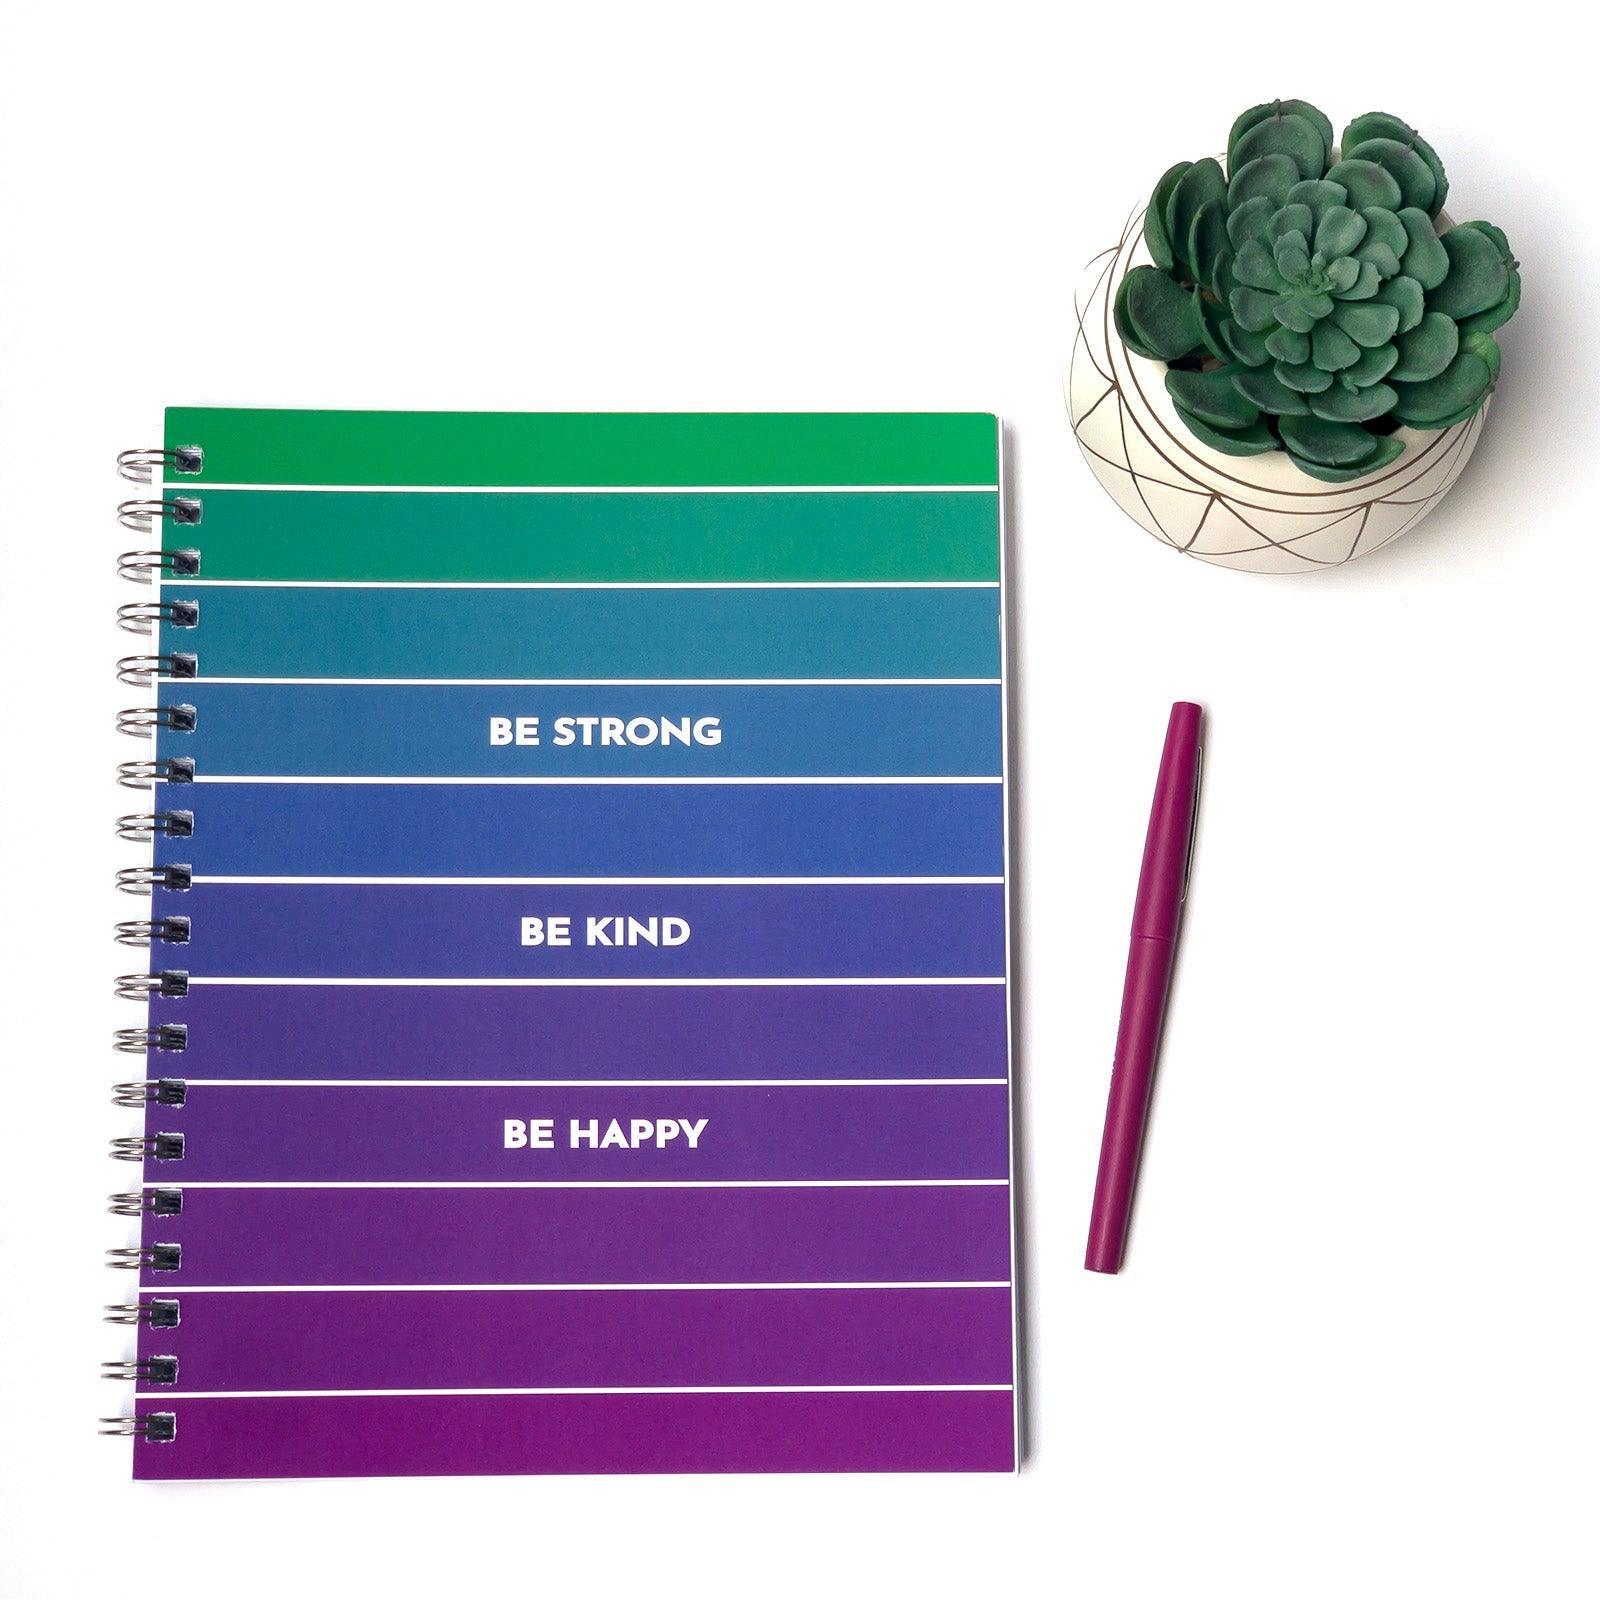 Be Strong Be Kind Be Happy Journal flat lay with small cactus and pen in the background